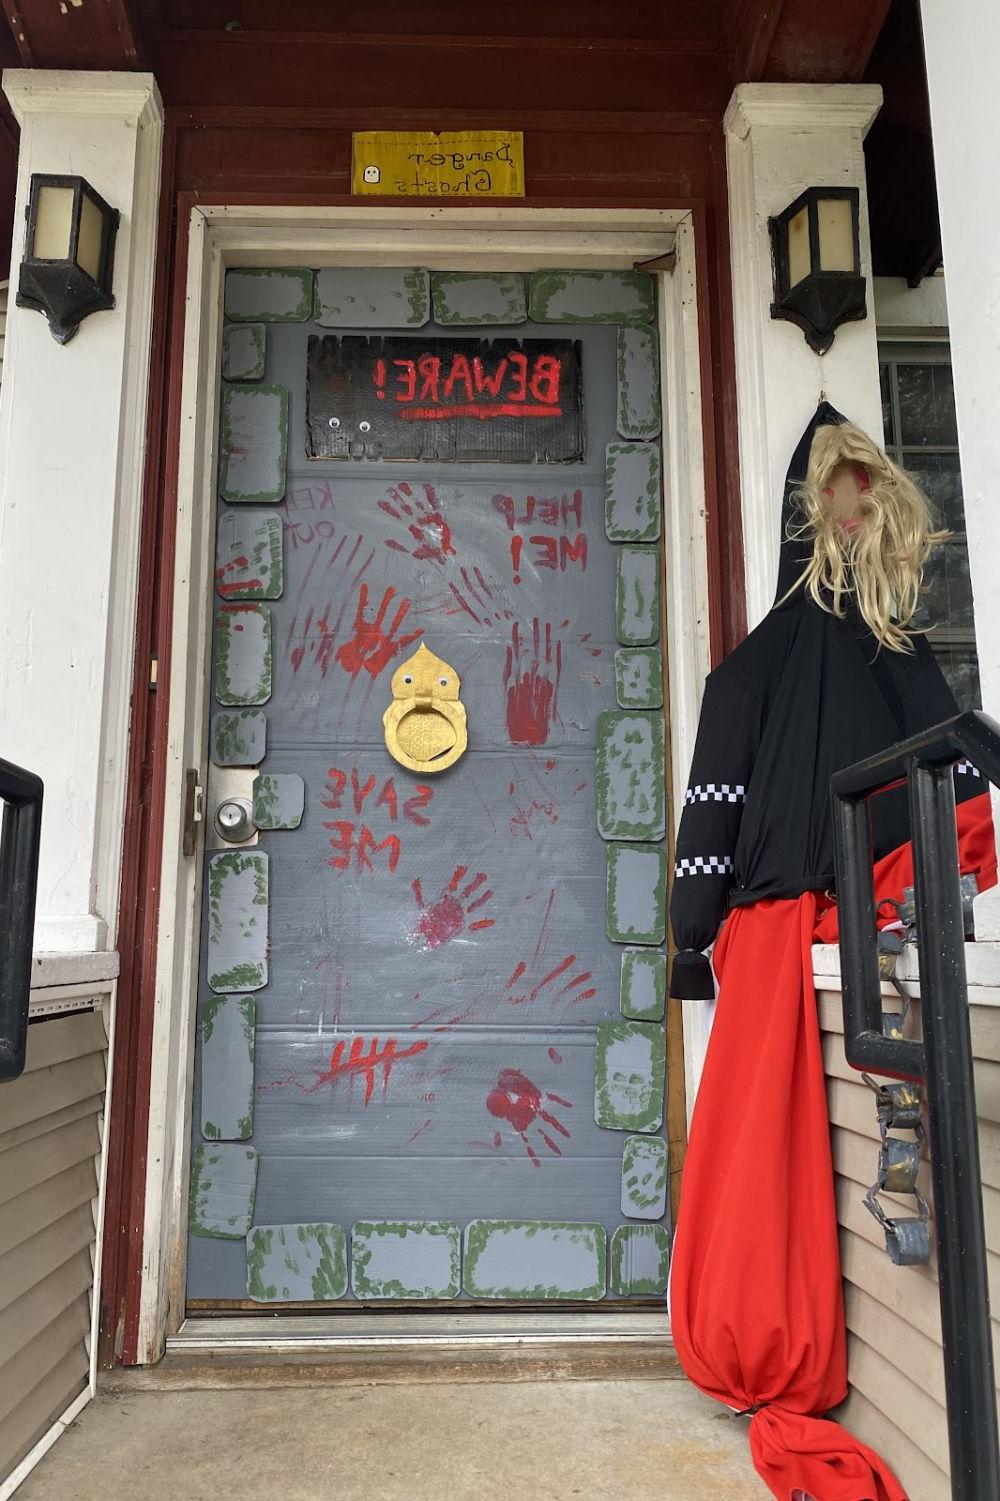 A dorm house door made up to appear like a dungeon with handprints and messages in blood.